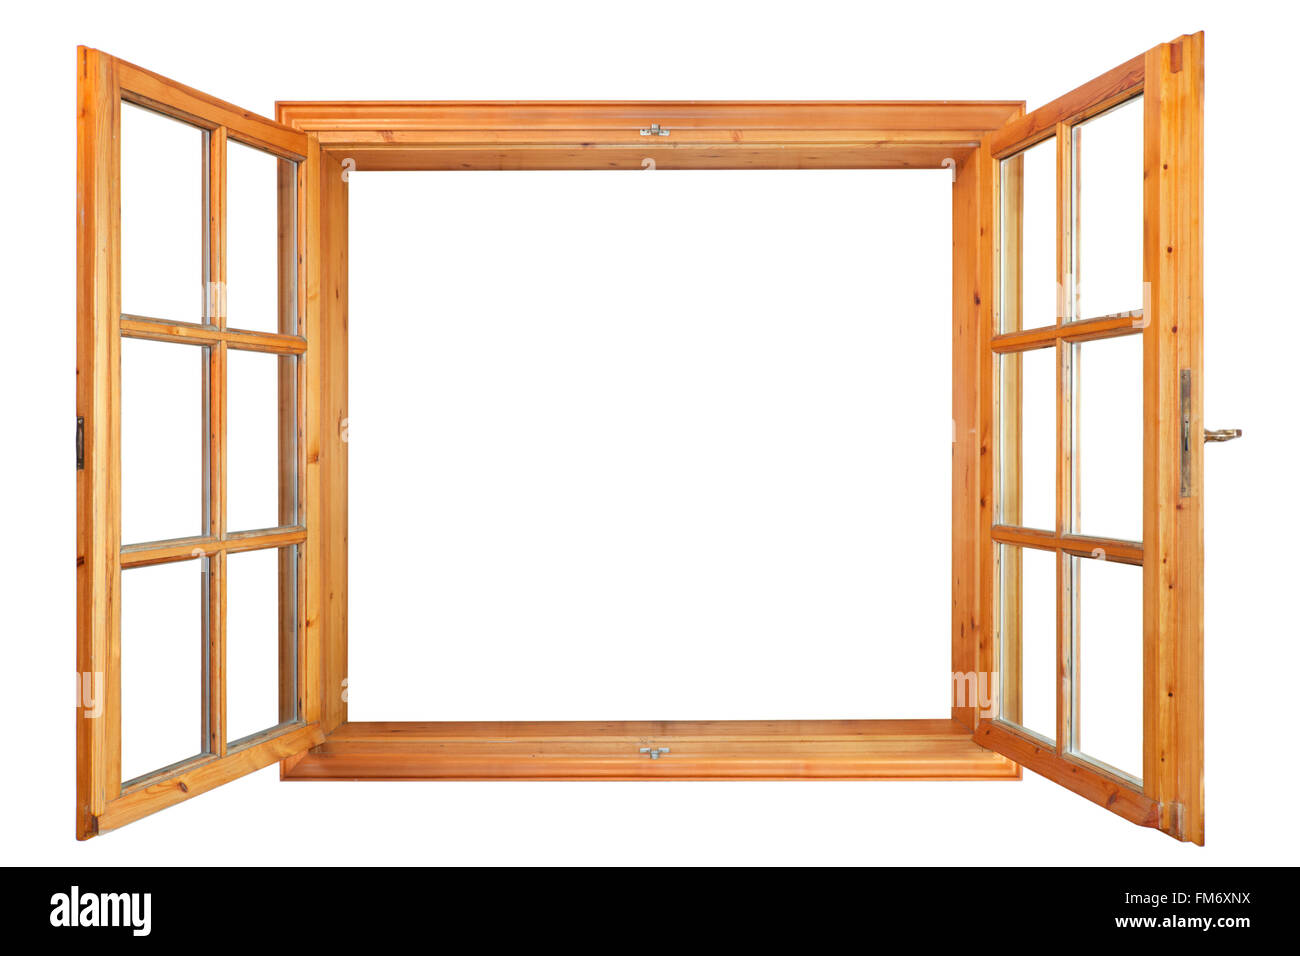 Open wooden window isolated on white background from inside Stock Photo